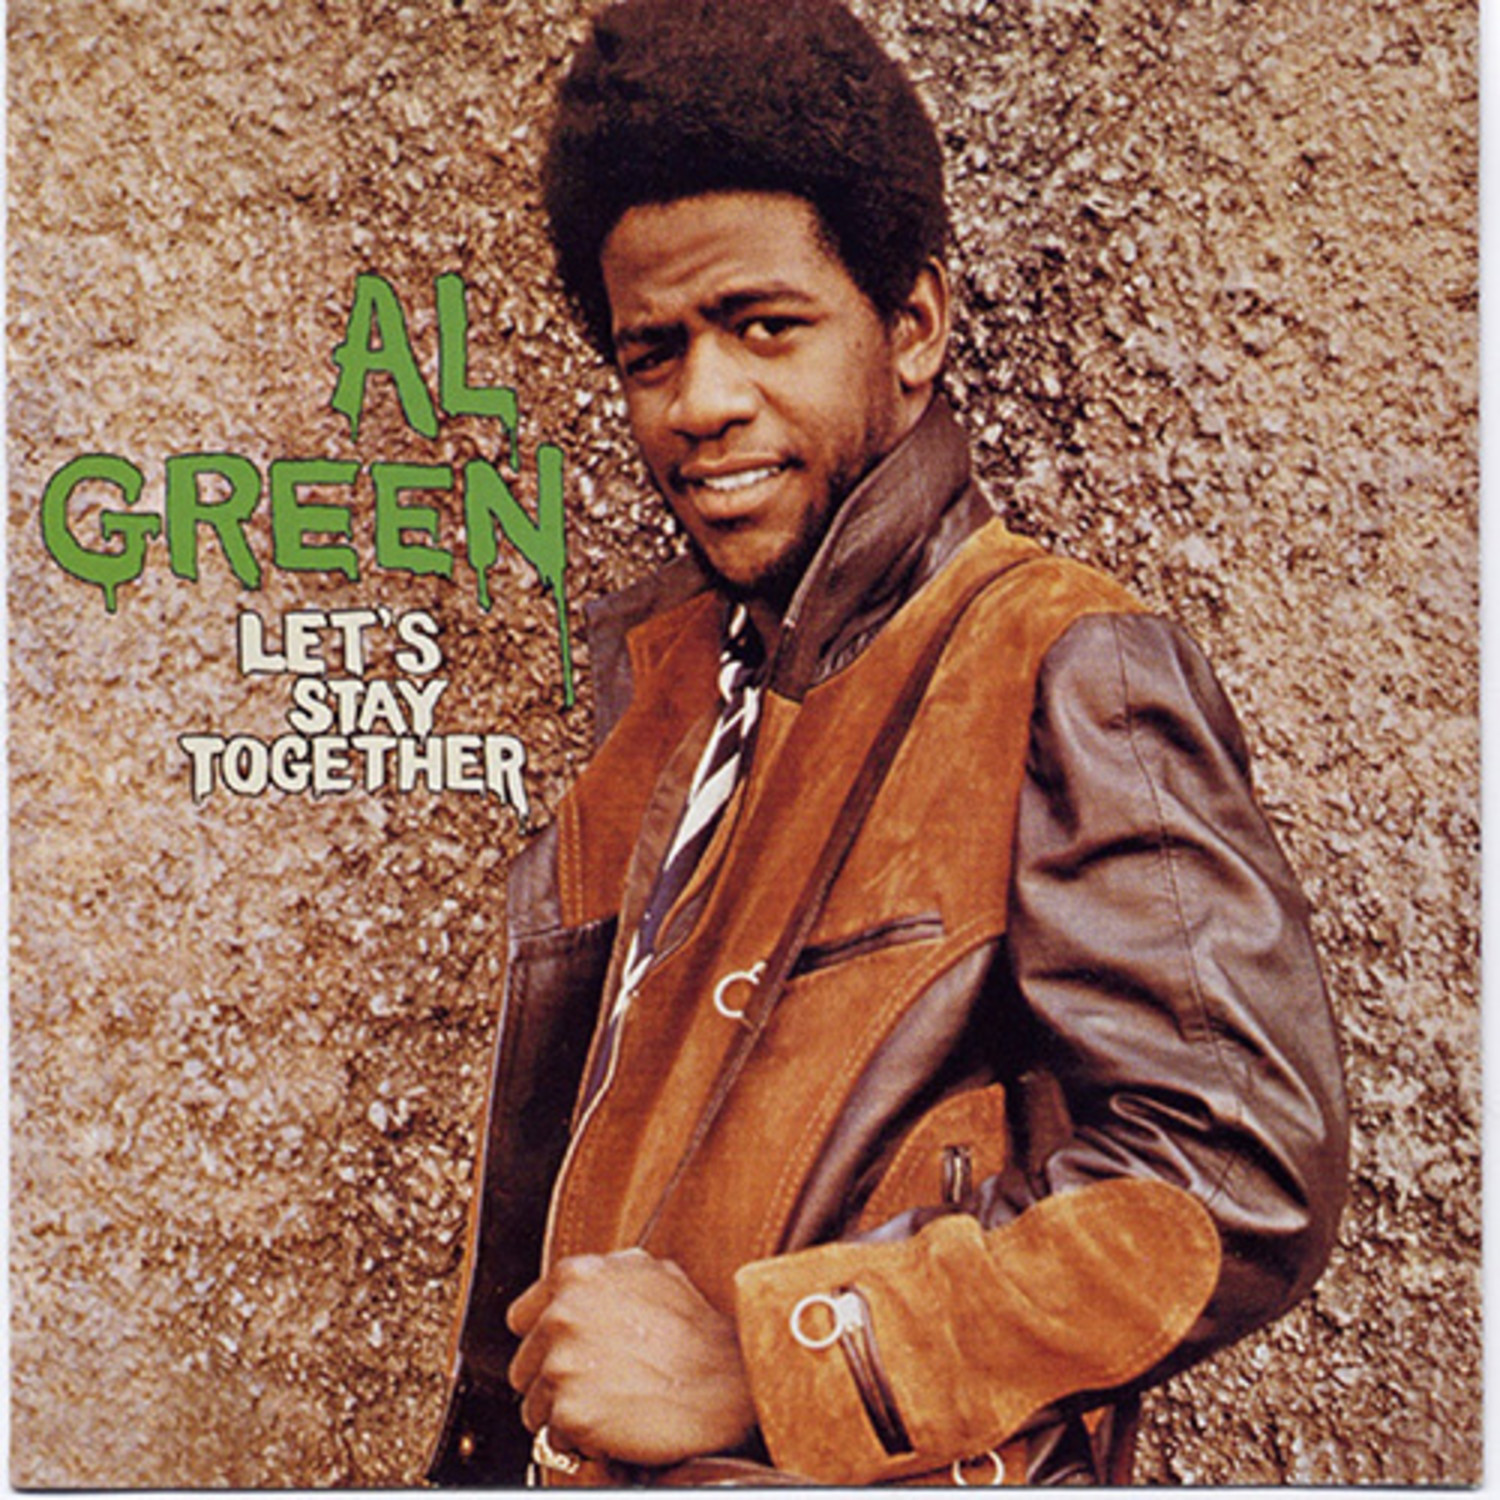 Al Green - Let's Stay Together LP - Wax Trax Records